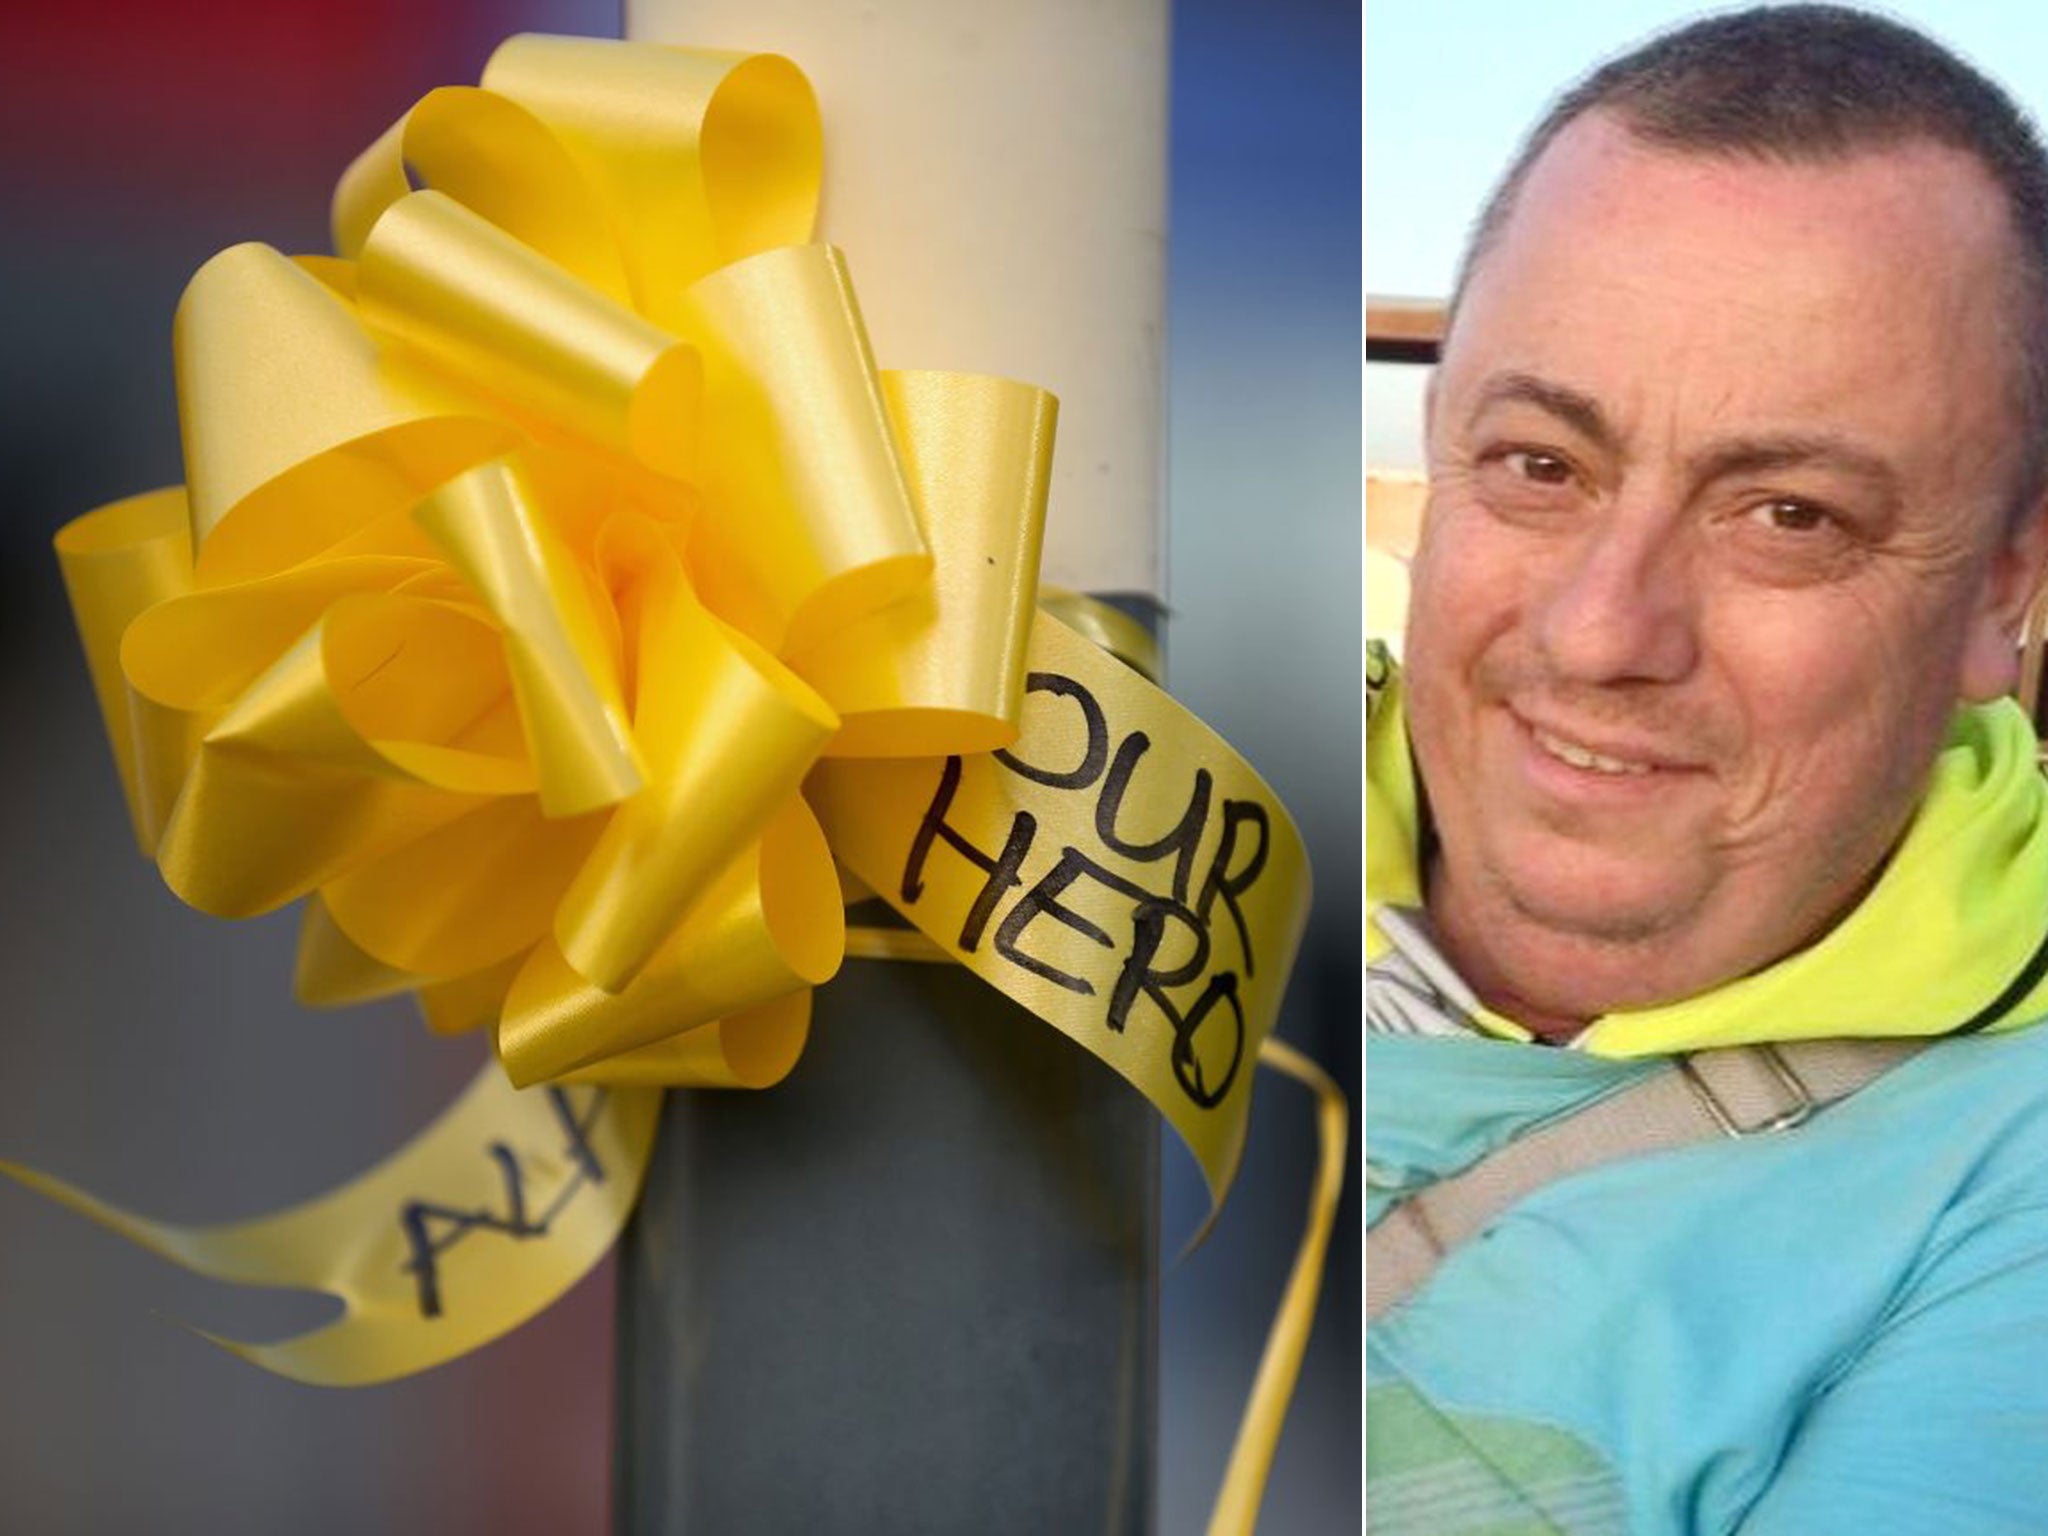 Alan Henning was taken hostage last December after travelling with humanitarian aid convoys to Syria. His death was confirmed last Friday.